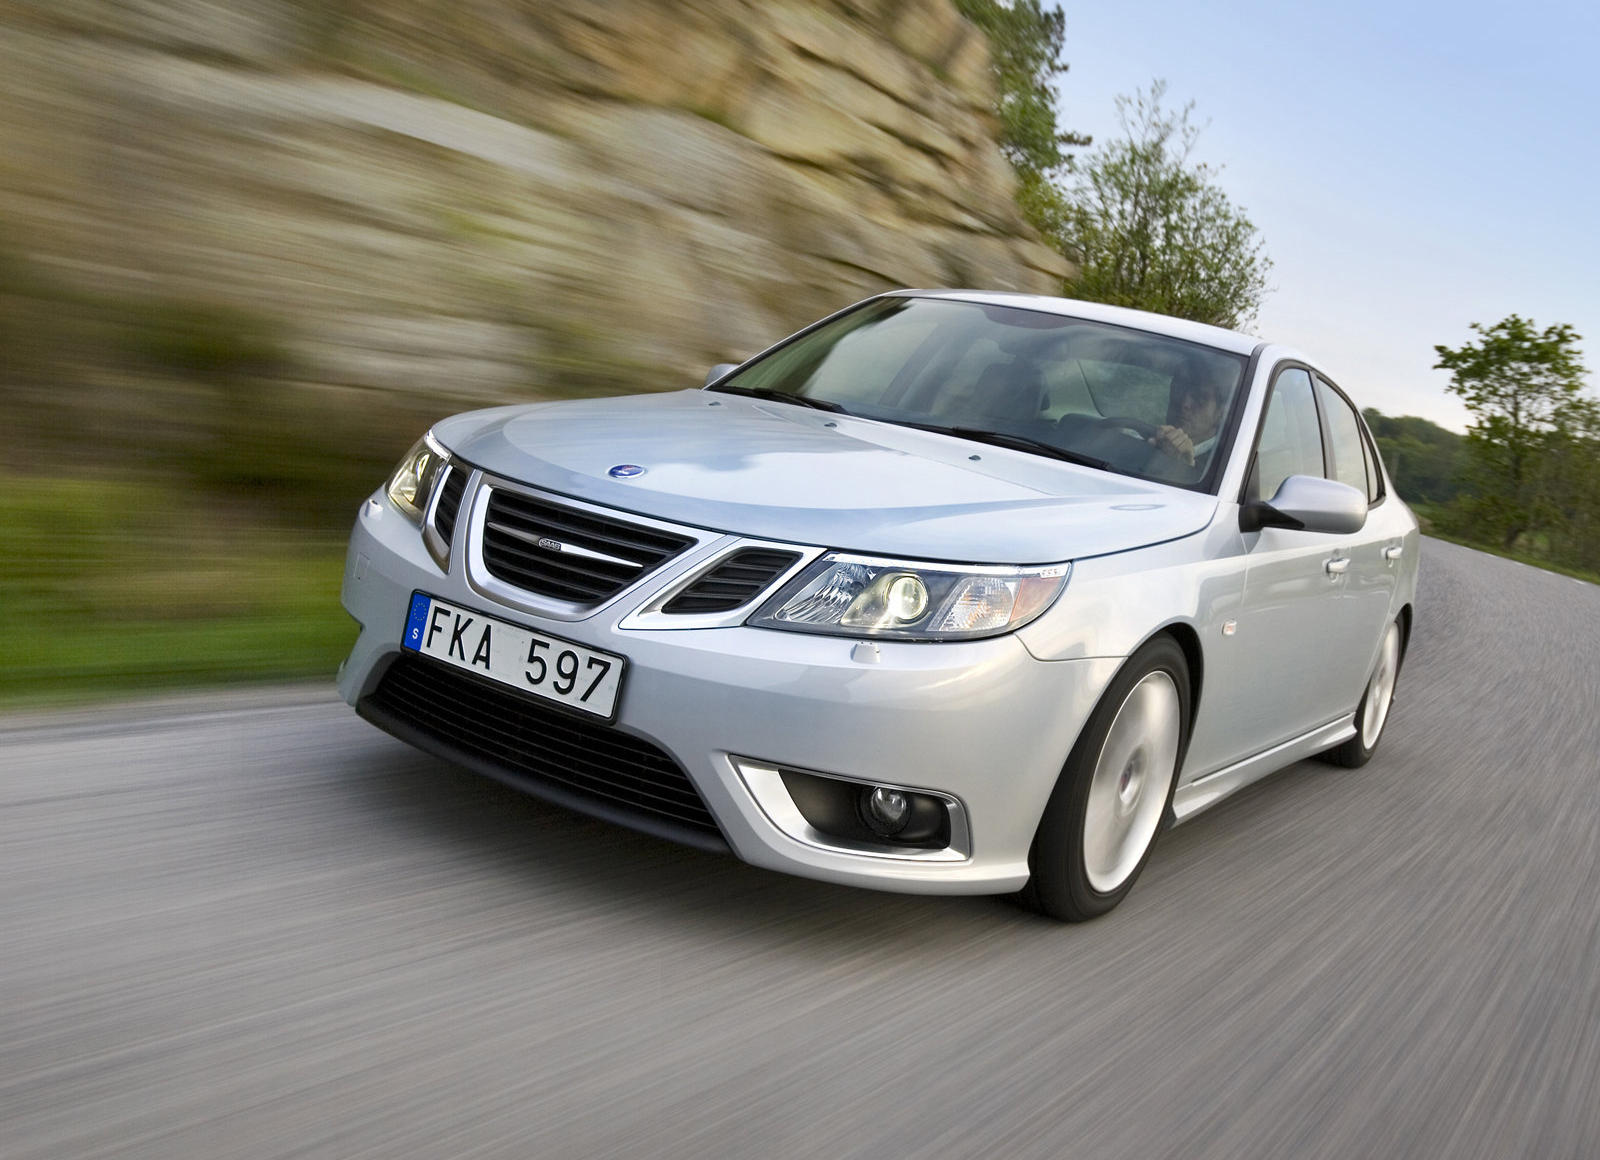 2010 Saab 9-3 Sedan: Review, Trims, Specs, Price, New Interior Features,  Exterior Design, and Specifications | CarBuzz